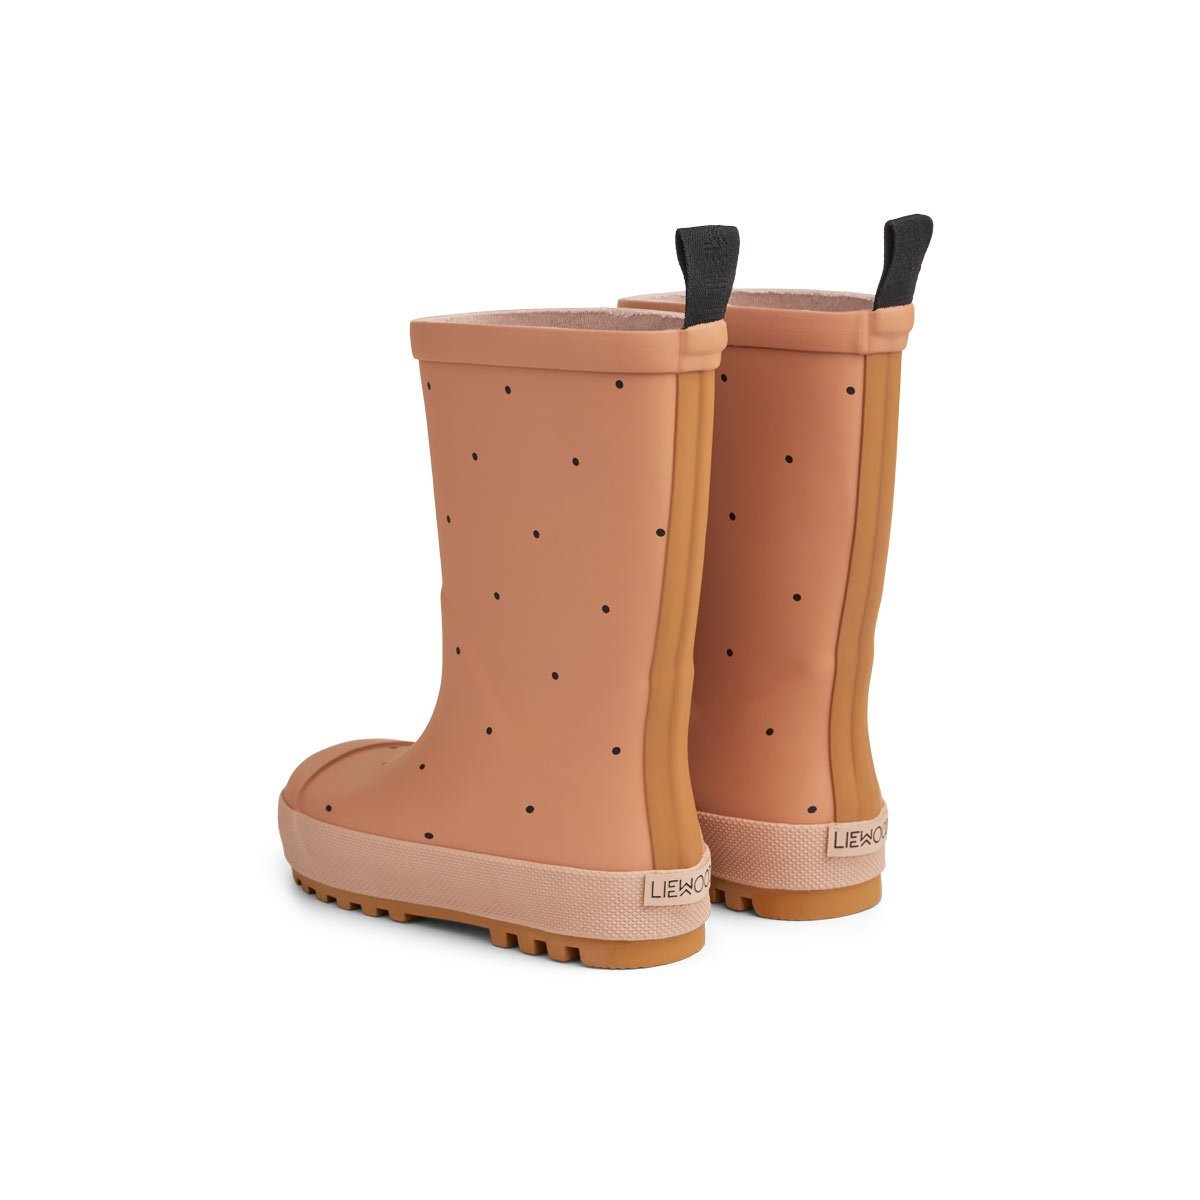 Liewood River Rain Boot in Classic Dot Tuscany Rose Mix - Scandibørn